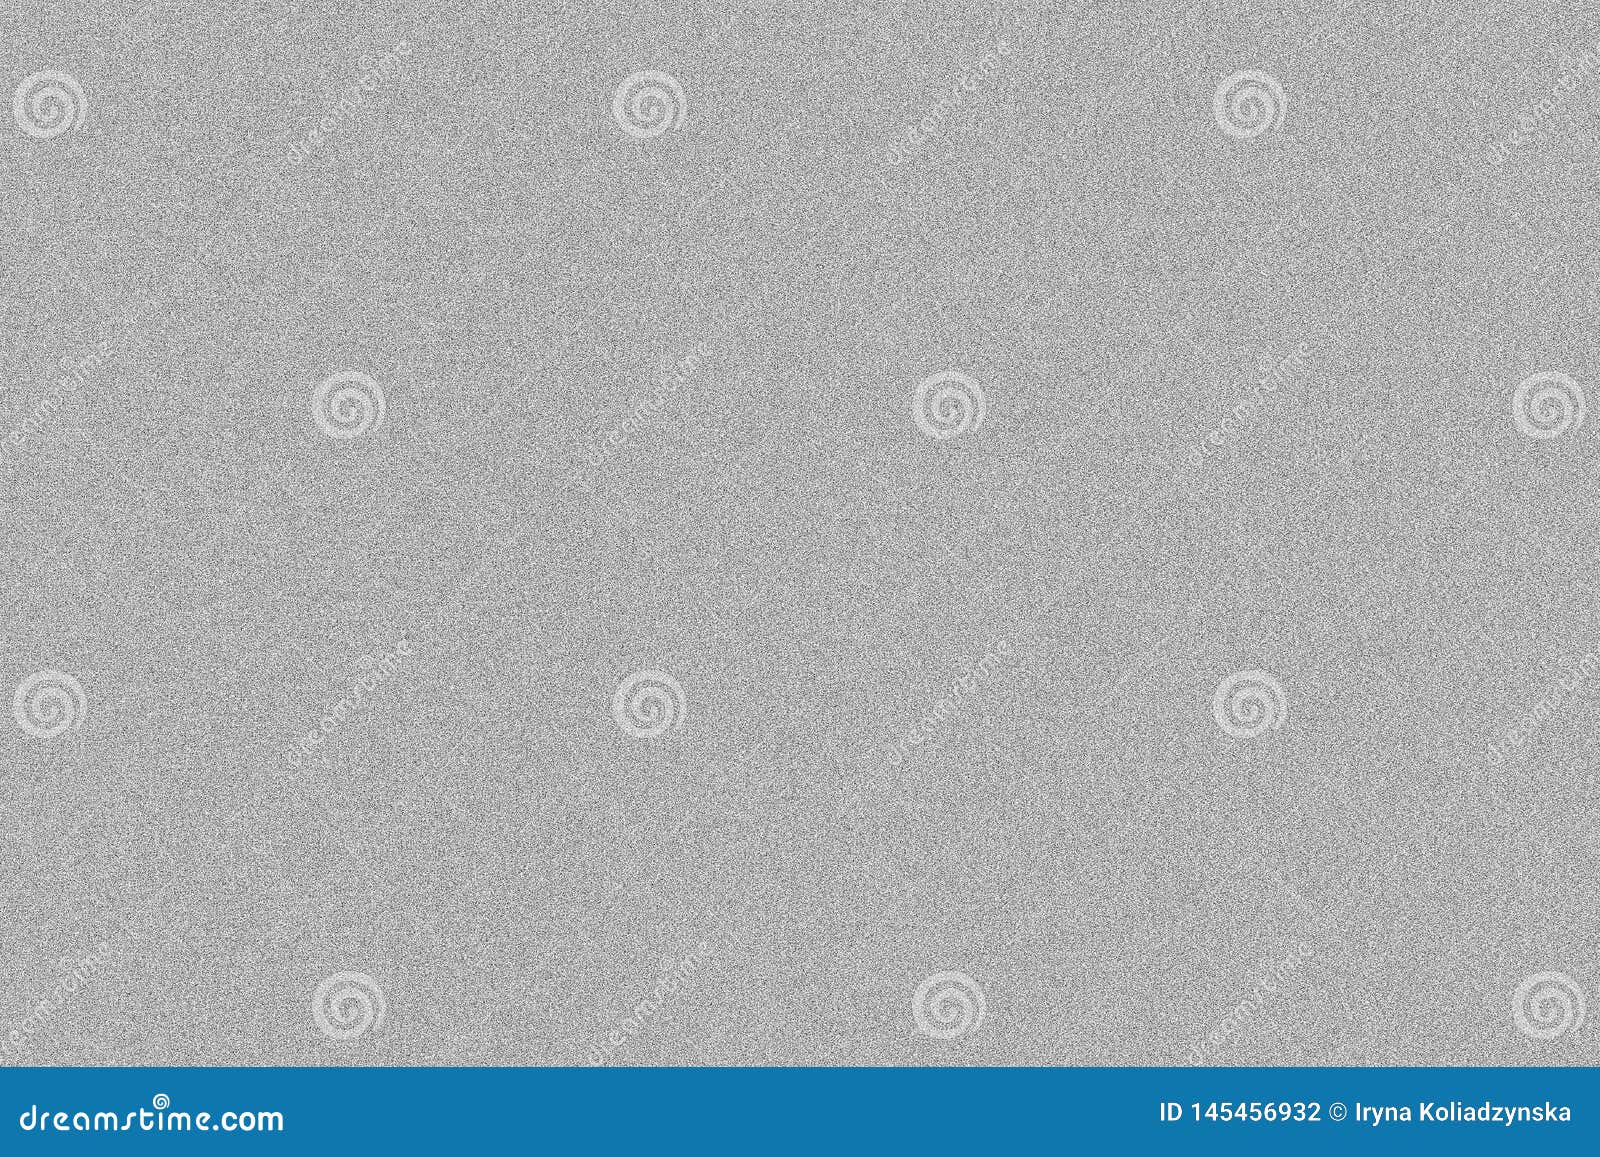 white noise. background effect with sound effect and grain. distress overlay texture for your . grainy gradient background